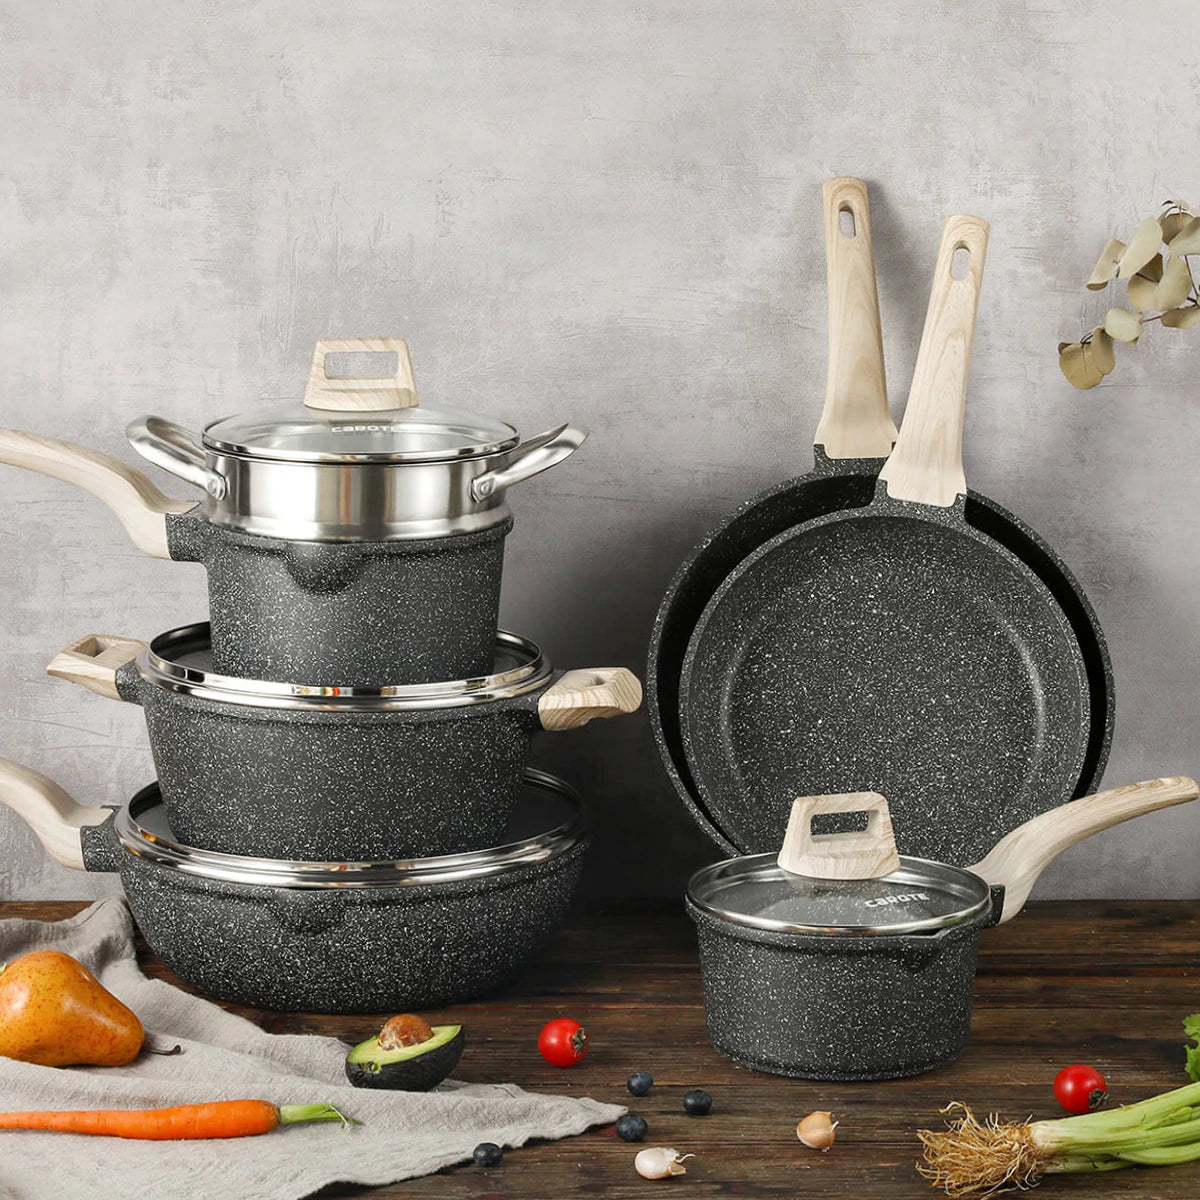 Die Cast Cooking Pots And Pans Kitchen Granite Cookware Set Marble Non  Stick Coating With Wooden Handle - Buy Die Cast Cooking Pots And Pans  Kitchen Granite Cookware Set Marble Non Stick